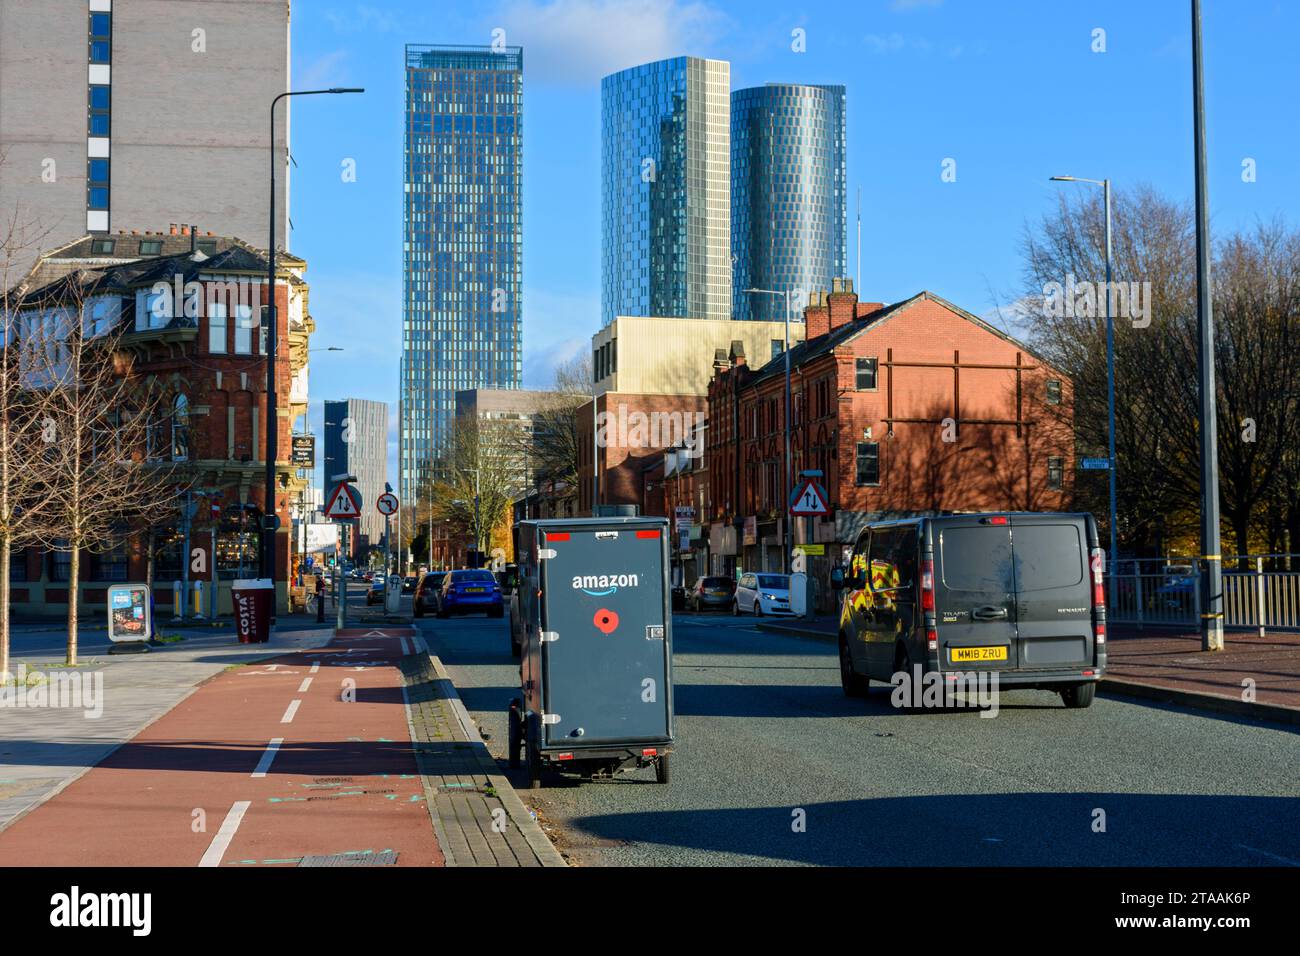 An Amazon e-cargo delivery vehicle on Chester Road, Manchester, England, UK. The Elizabeth Tower, The Blade and the Three60 apartment blocks behind. Stock Photo